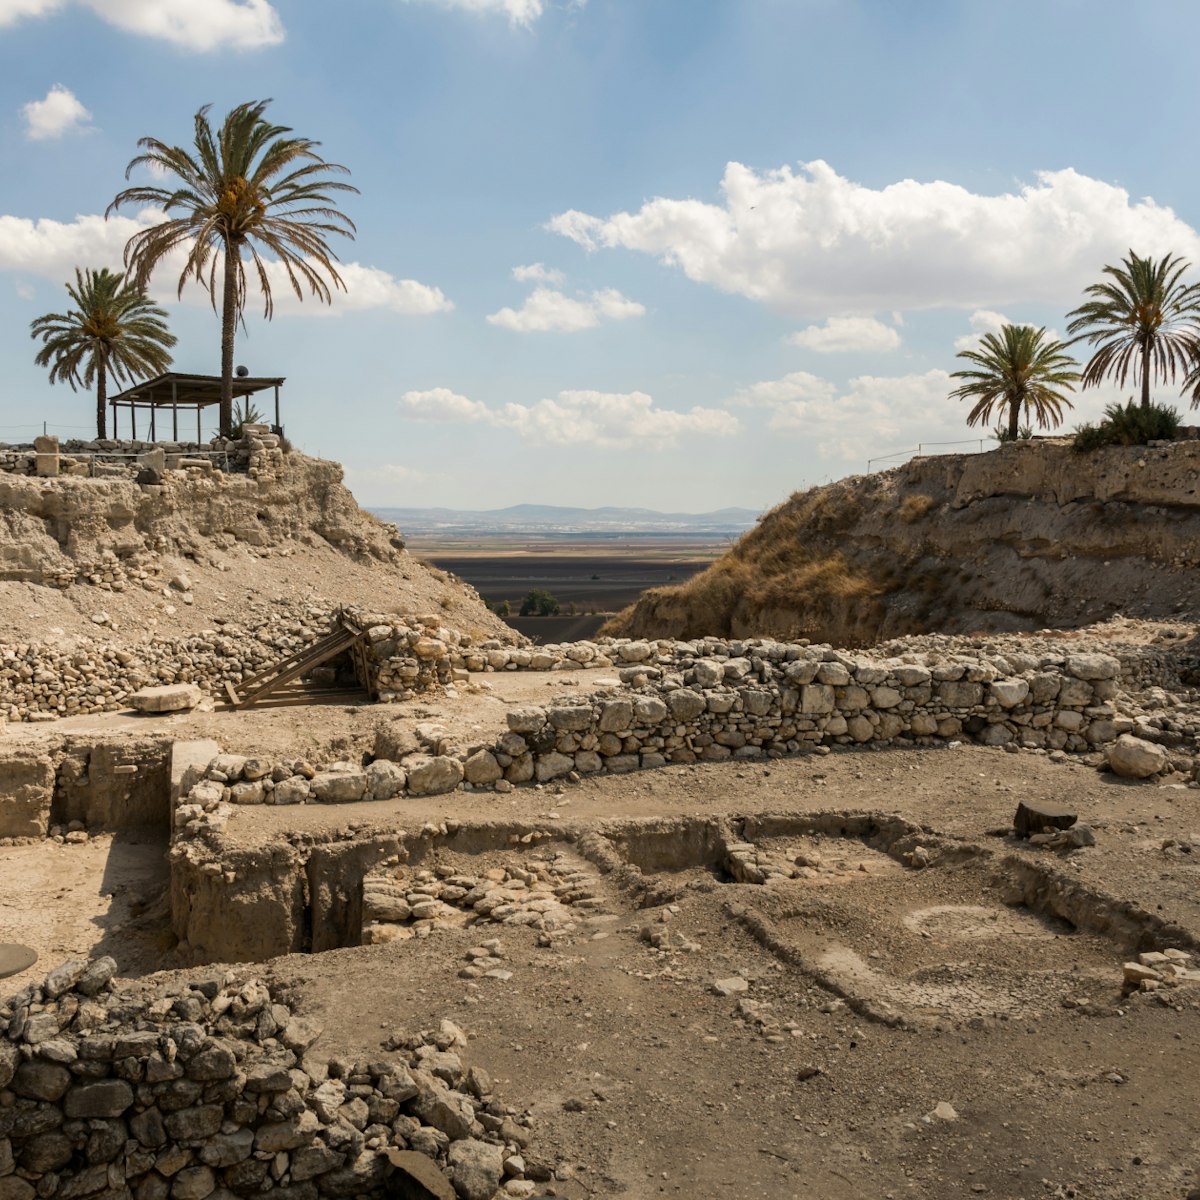 Visit to Megiddo National Park, Israel; Shutterstock ID 567815371; Your name (First / Last): Lauren Keith; GL account no.: 65050; Netsuite department name: Online Editorial; Full Product or Project name including edition: Israel Update 2017